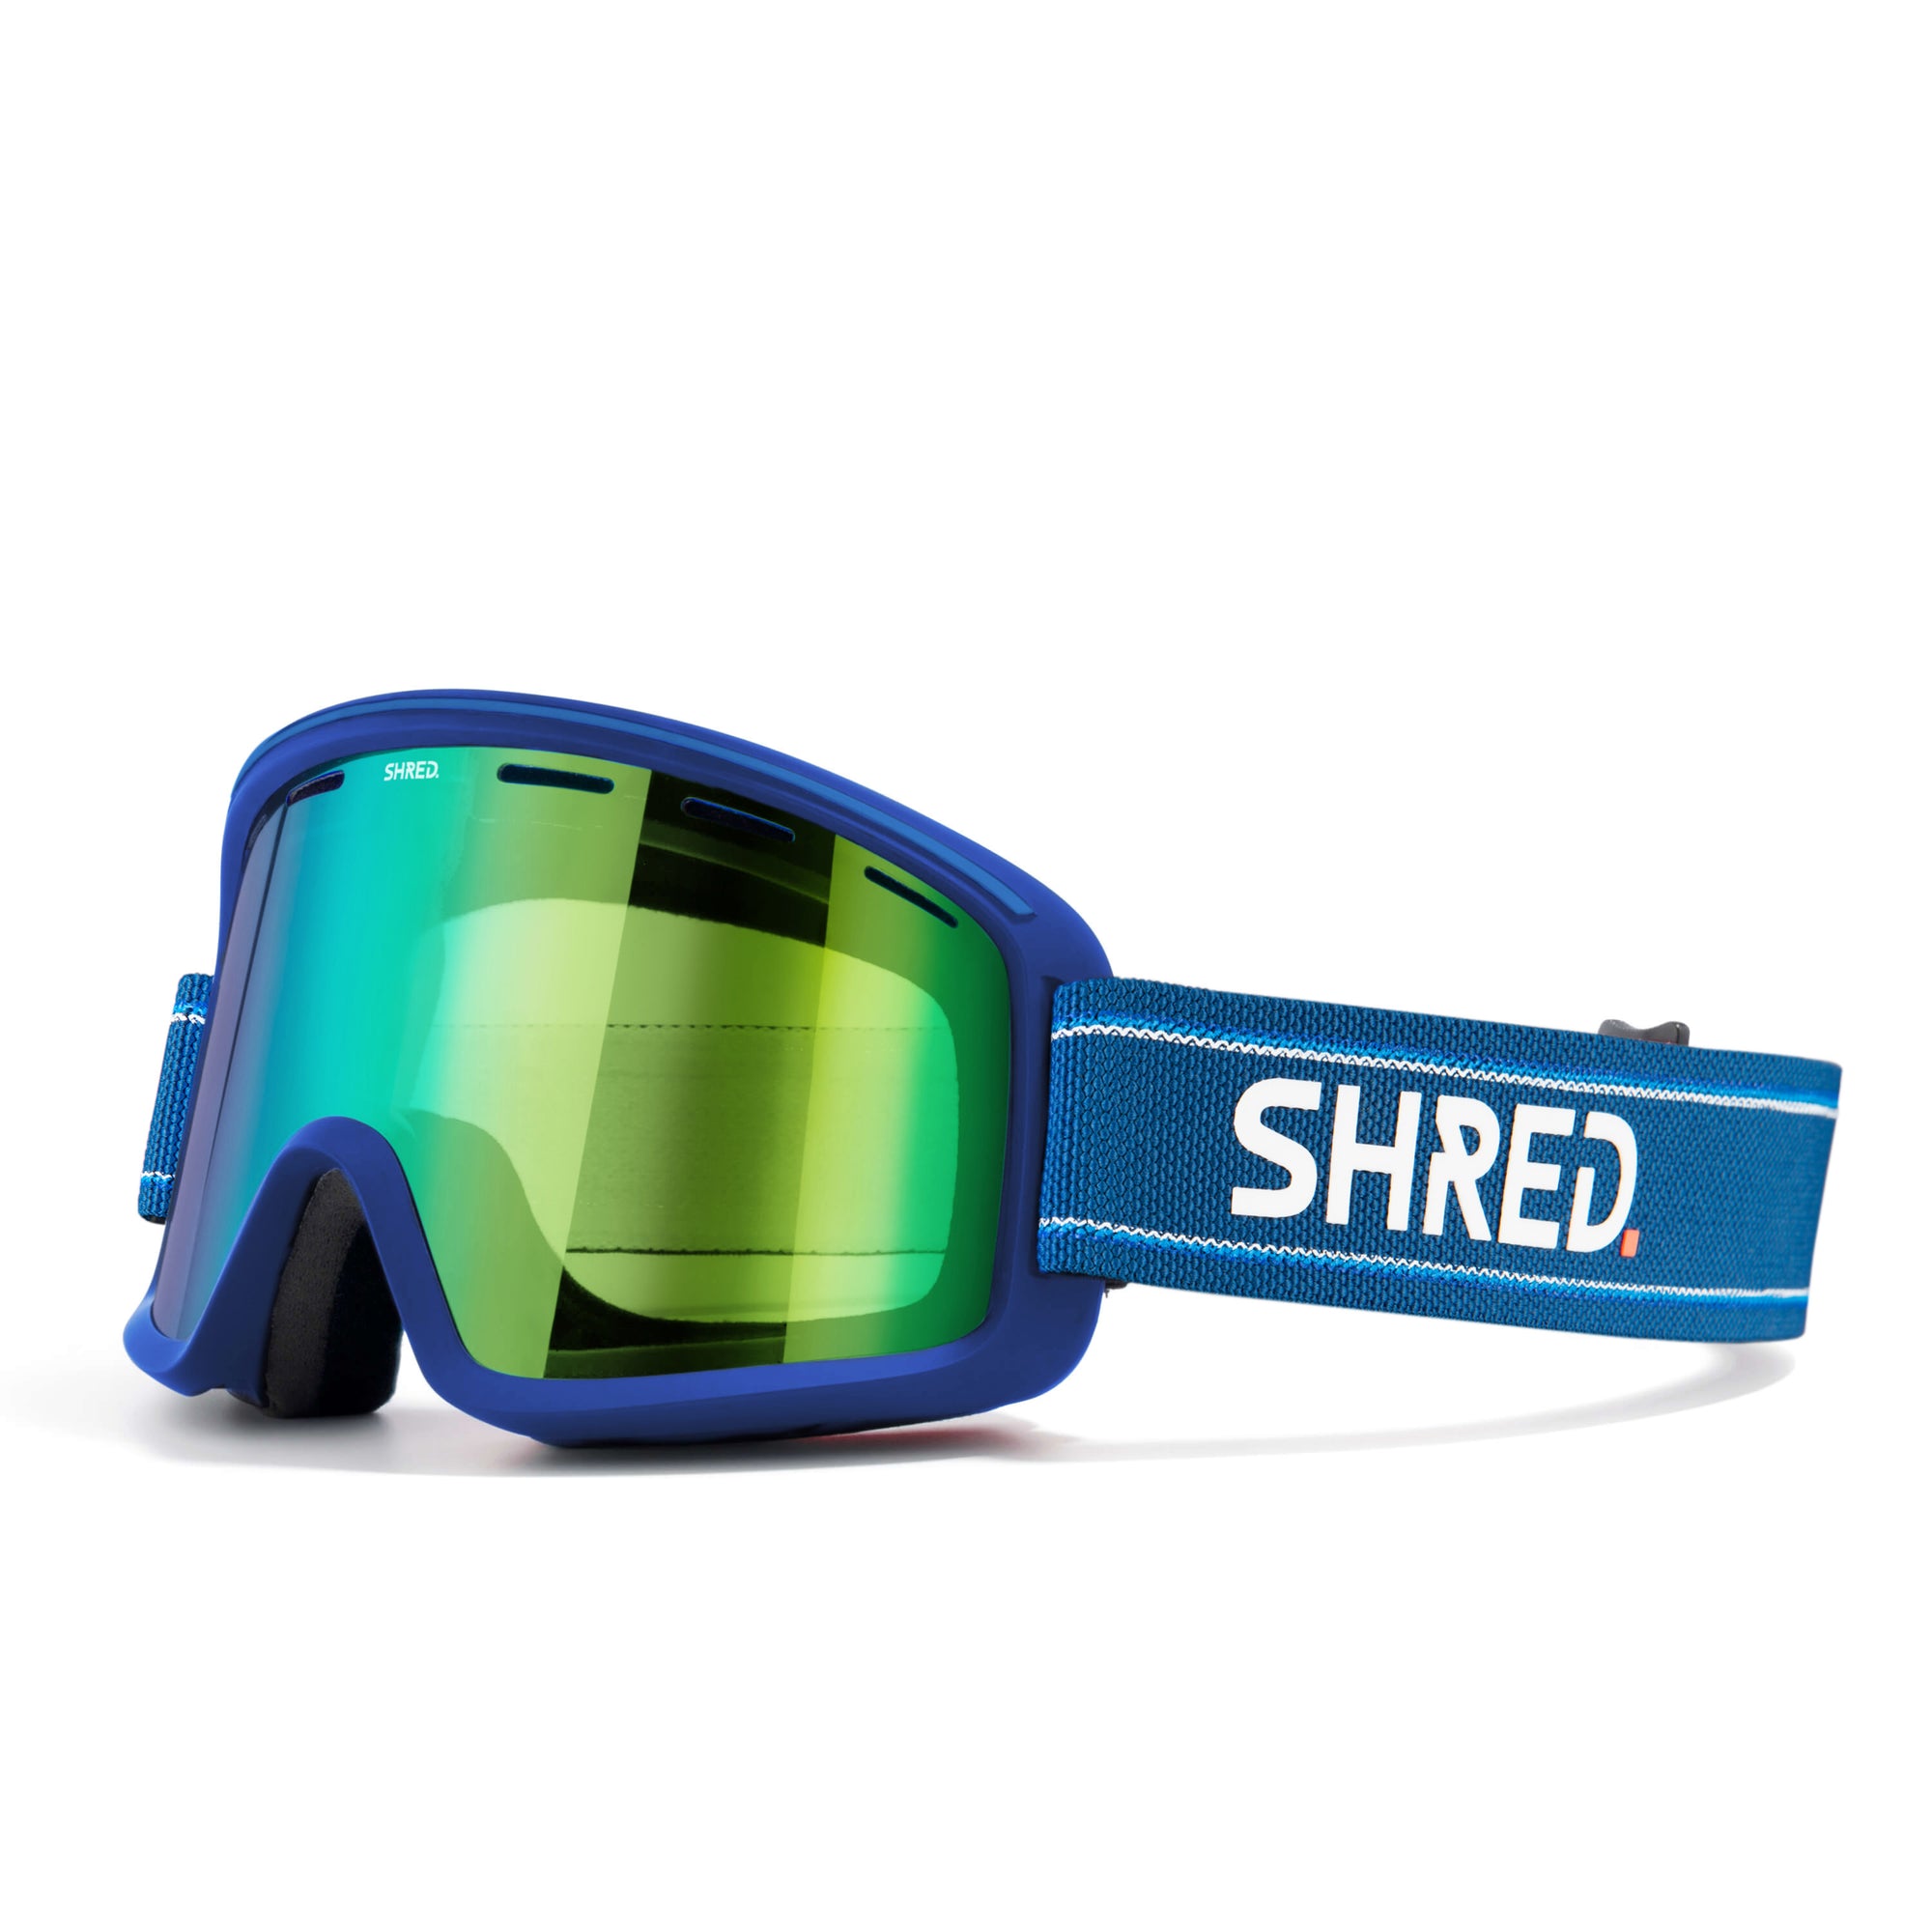 ZAEHD “HIGHDEF” SKI GOGGLES ARE NOW AVAILABLE ON ZAEHD.COM!¡🥽🔥 FIRST 10  PEOPLE TO BUY GOGGLES GET A FREE CHOP T-SHIRT!¡👕🫱🏽 BECOME…